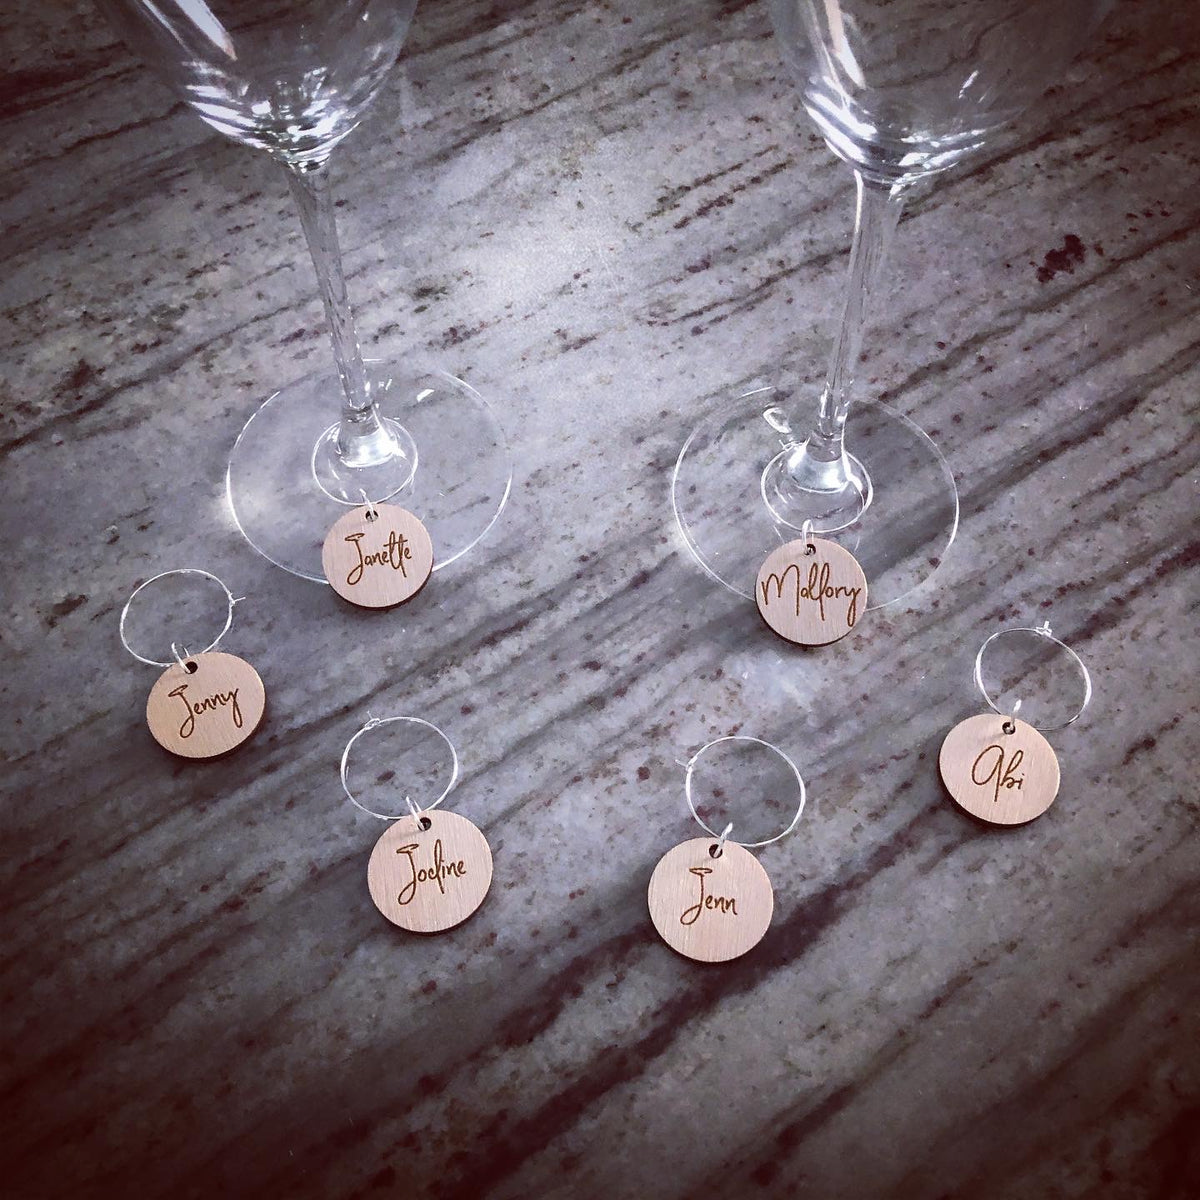 Personalized Wine Glass Charms - My Turn for Us